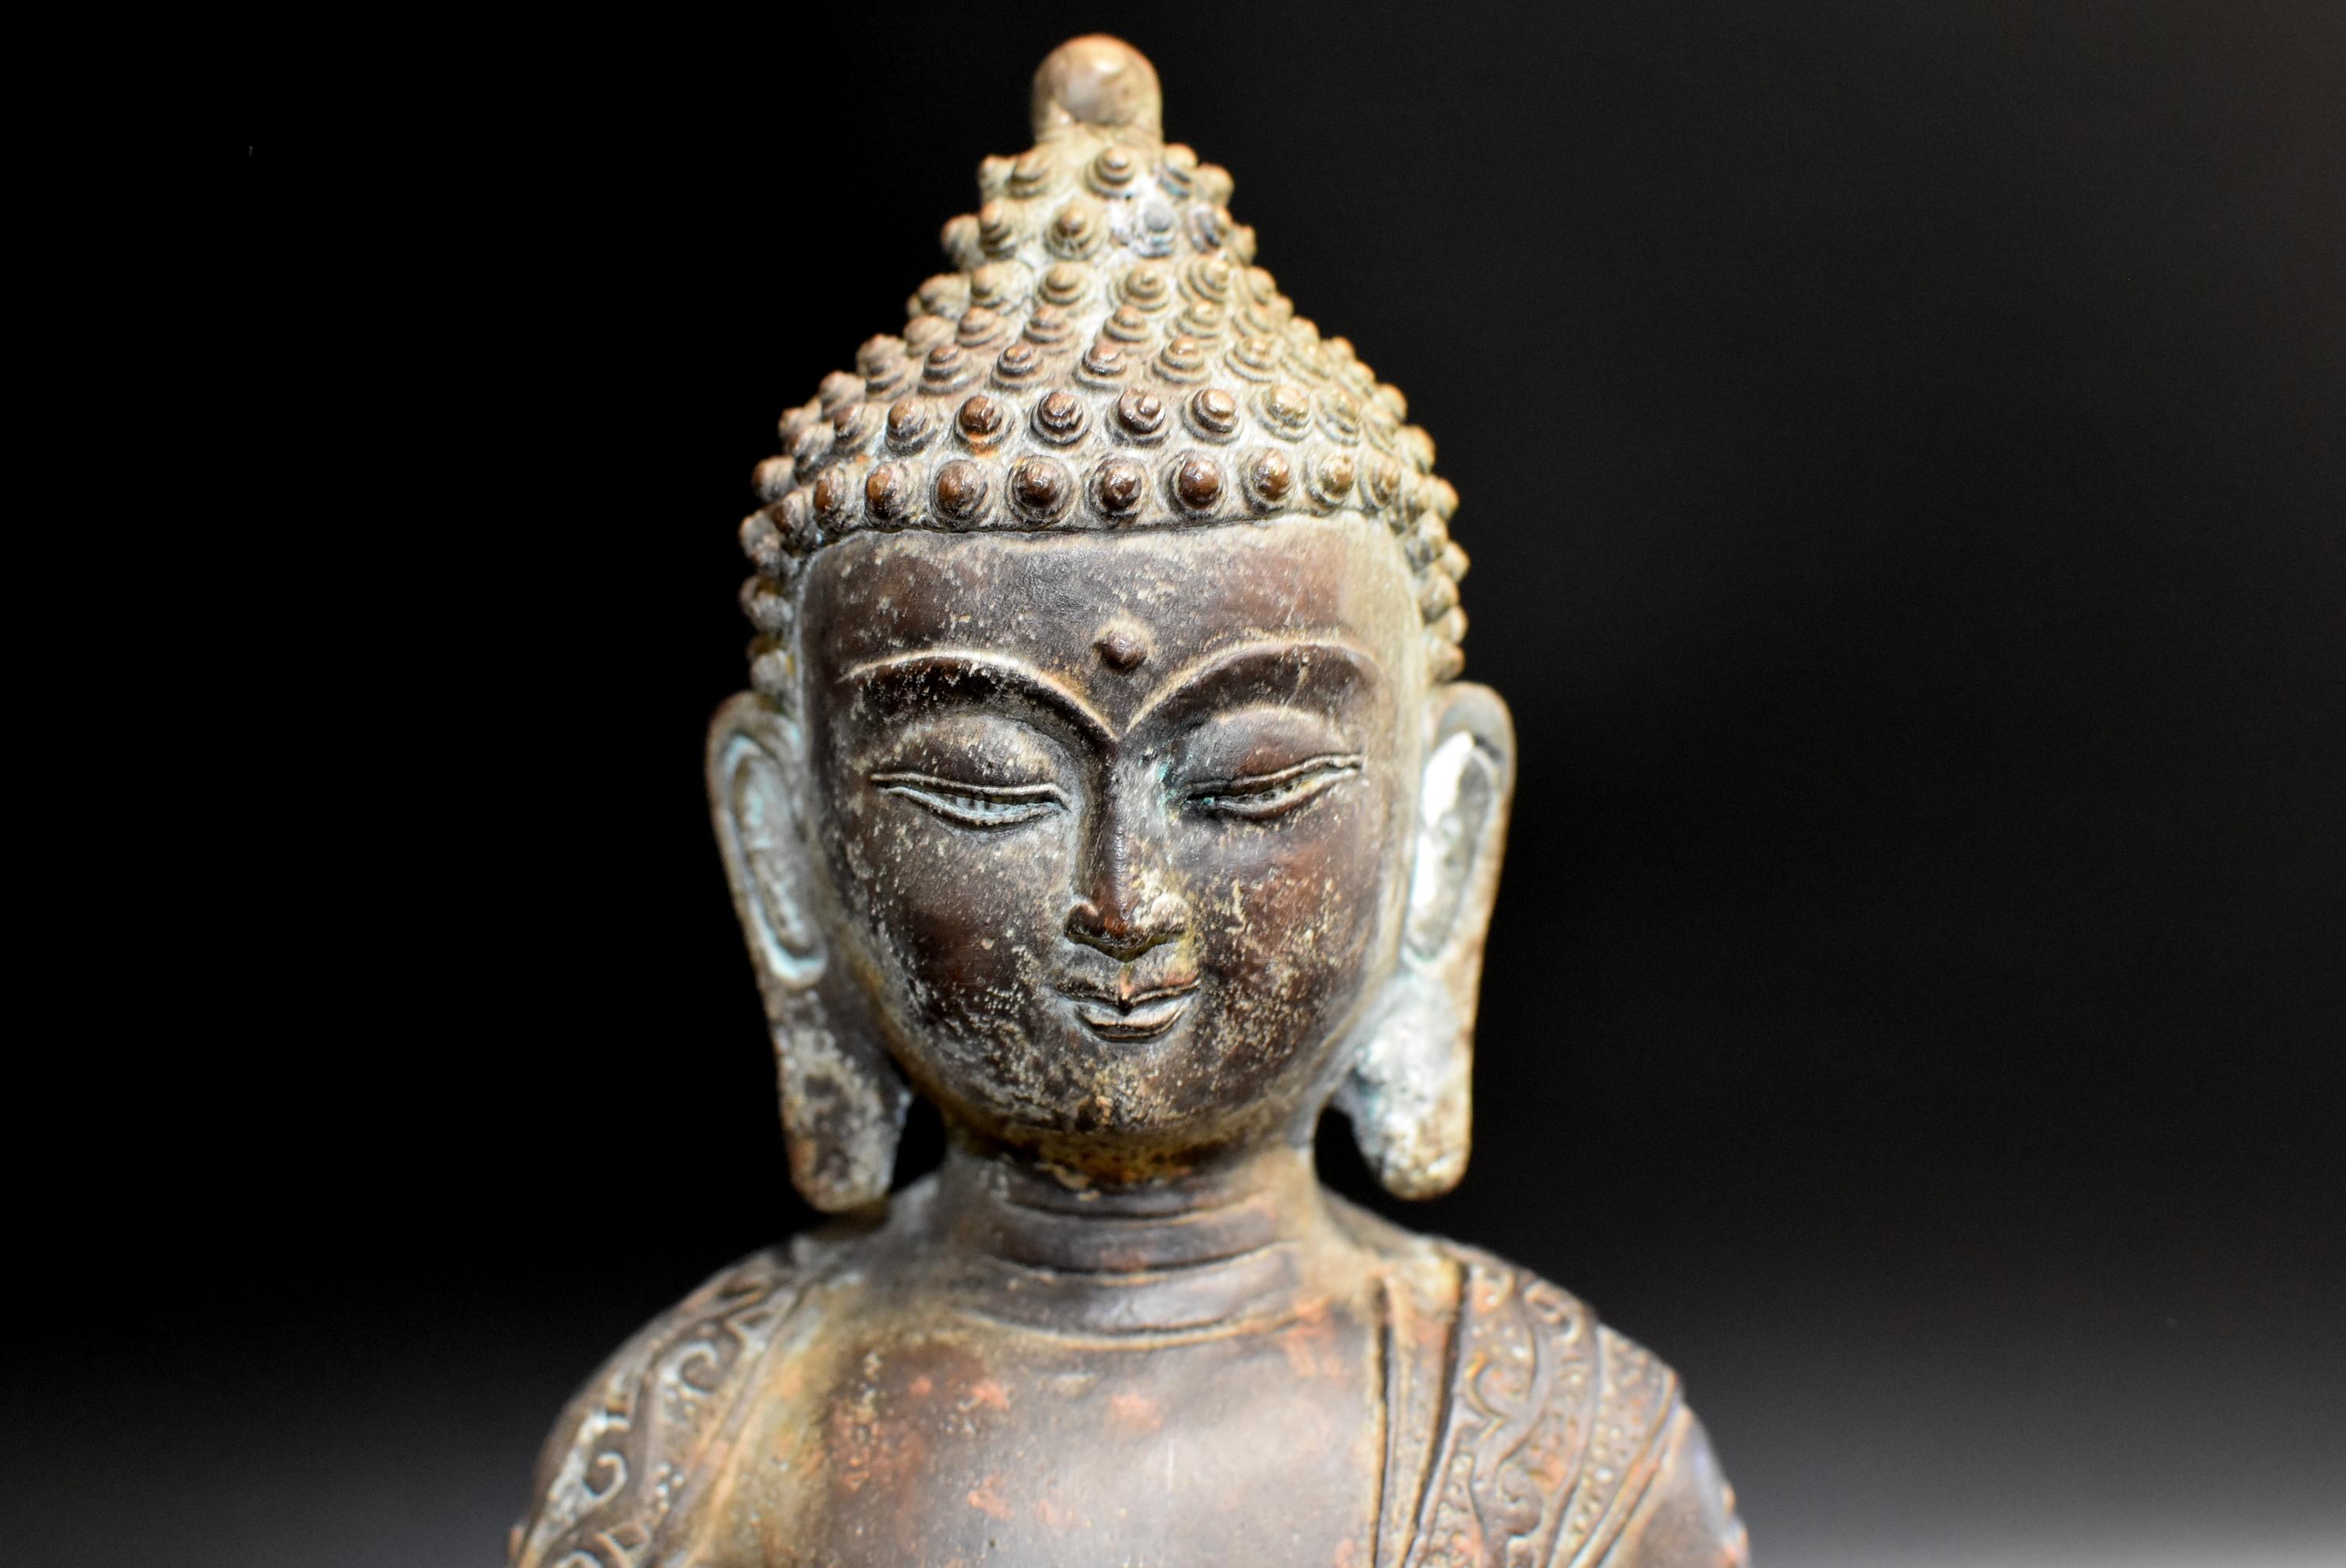 Exceptional Value! A beautiful, large bronze statue of a Buddha. Buddha is seated on a lotus throne and is wearing an elaborately decorated robe with motifs of clouds, dragons, foliage and scrolls. A Tang dynasty style full face, refine facial